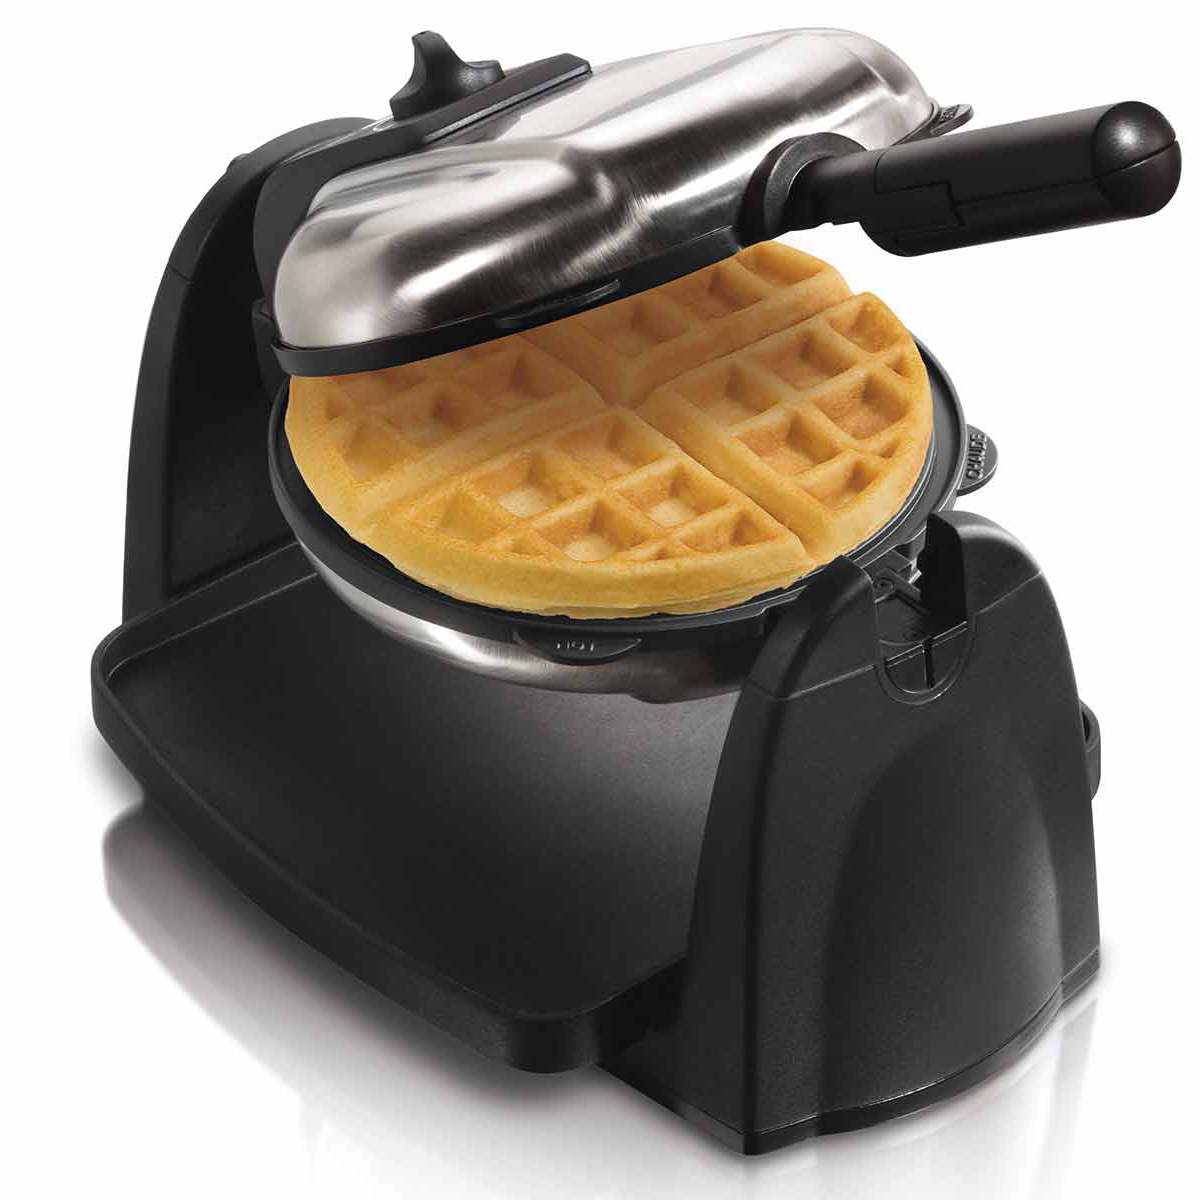 Flip Belgian Style Waffle Maker with Removable Plates (26030)